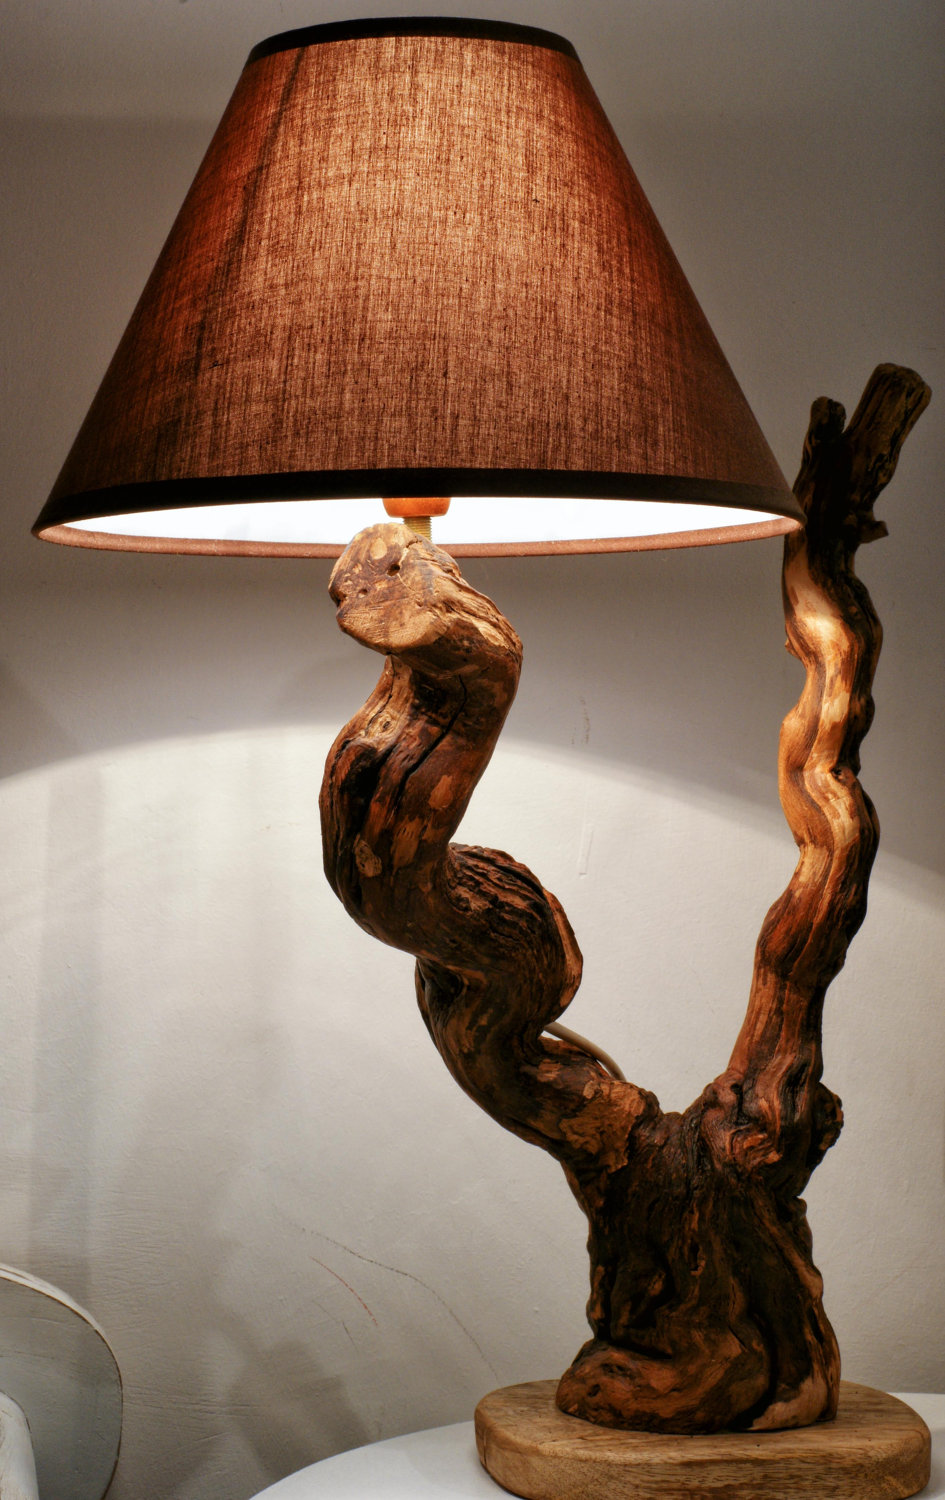 Do You Like To Have A handmade Wooden Lamp? Pouted